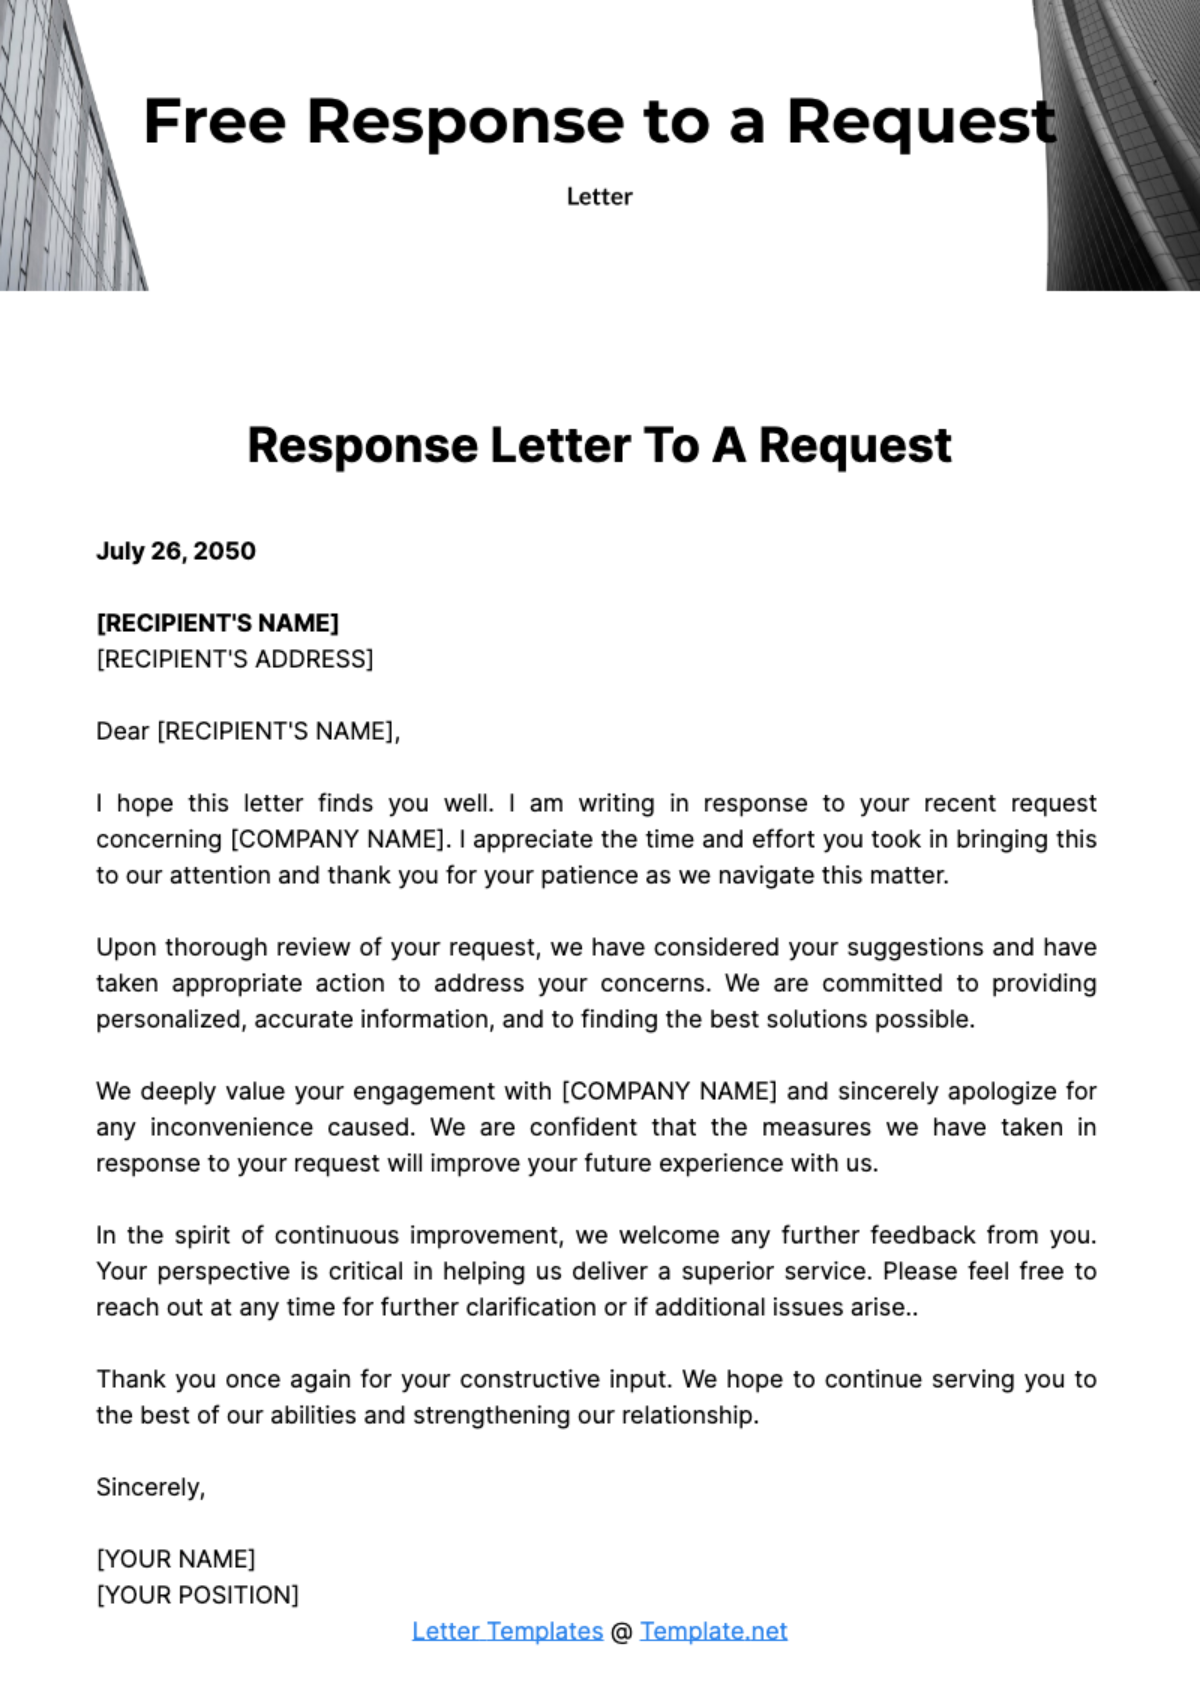 Response Letter to a Request Template